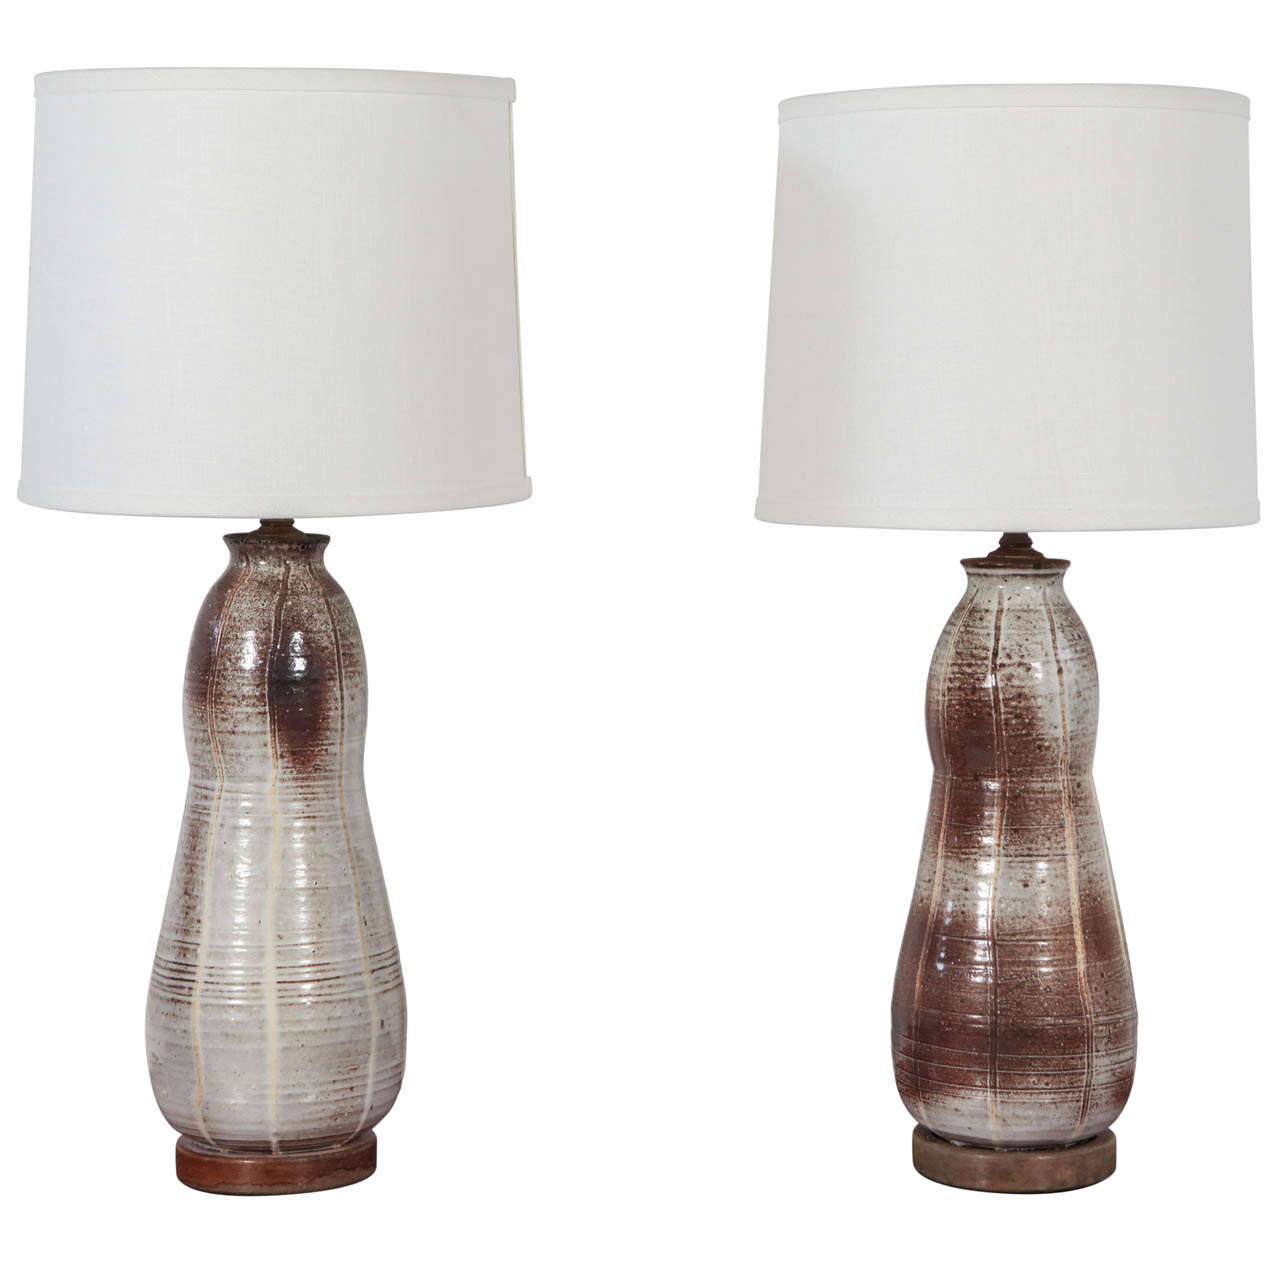 Pair of Ceramic White and Brown Table Lamps